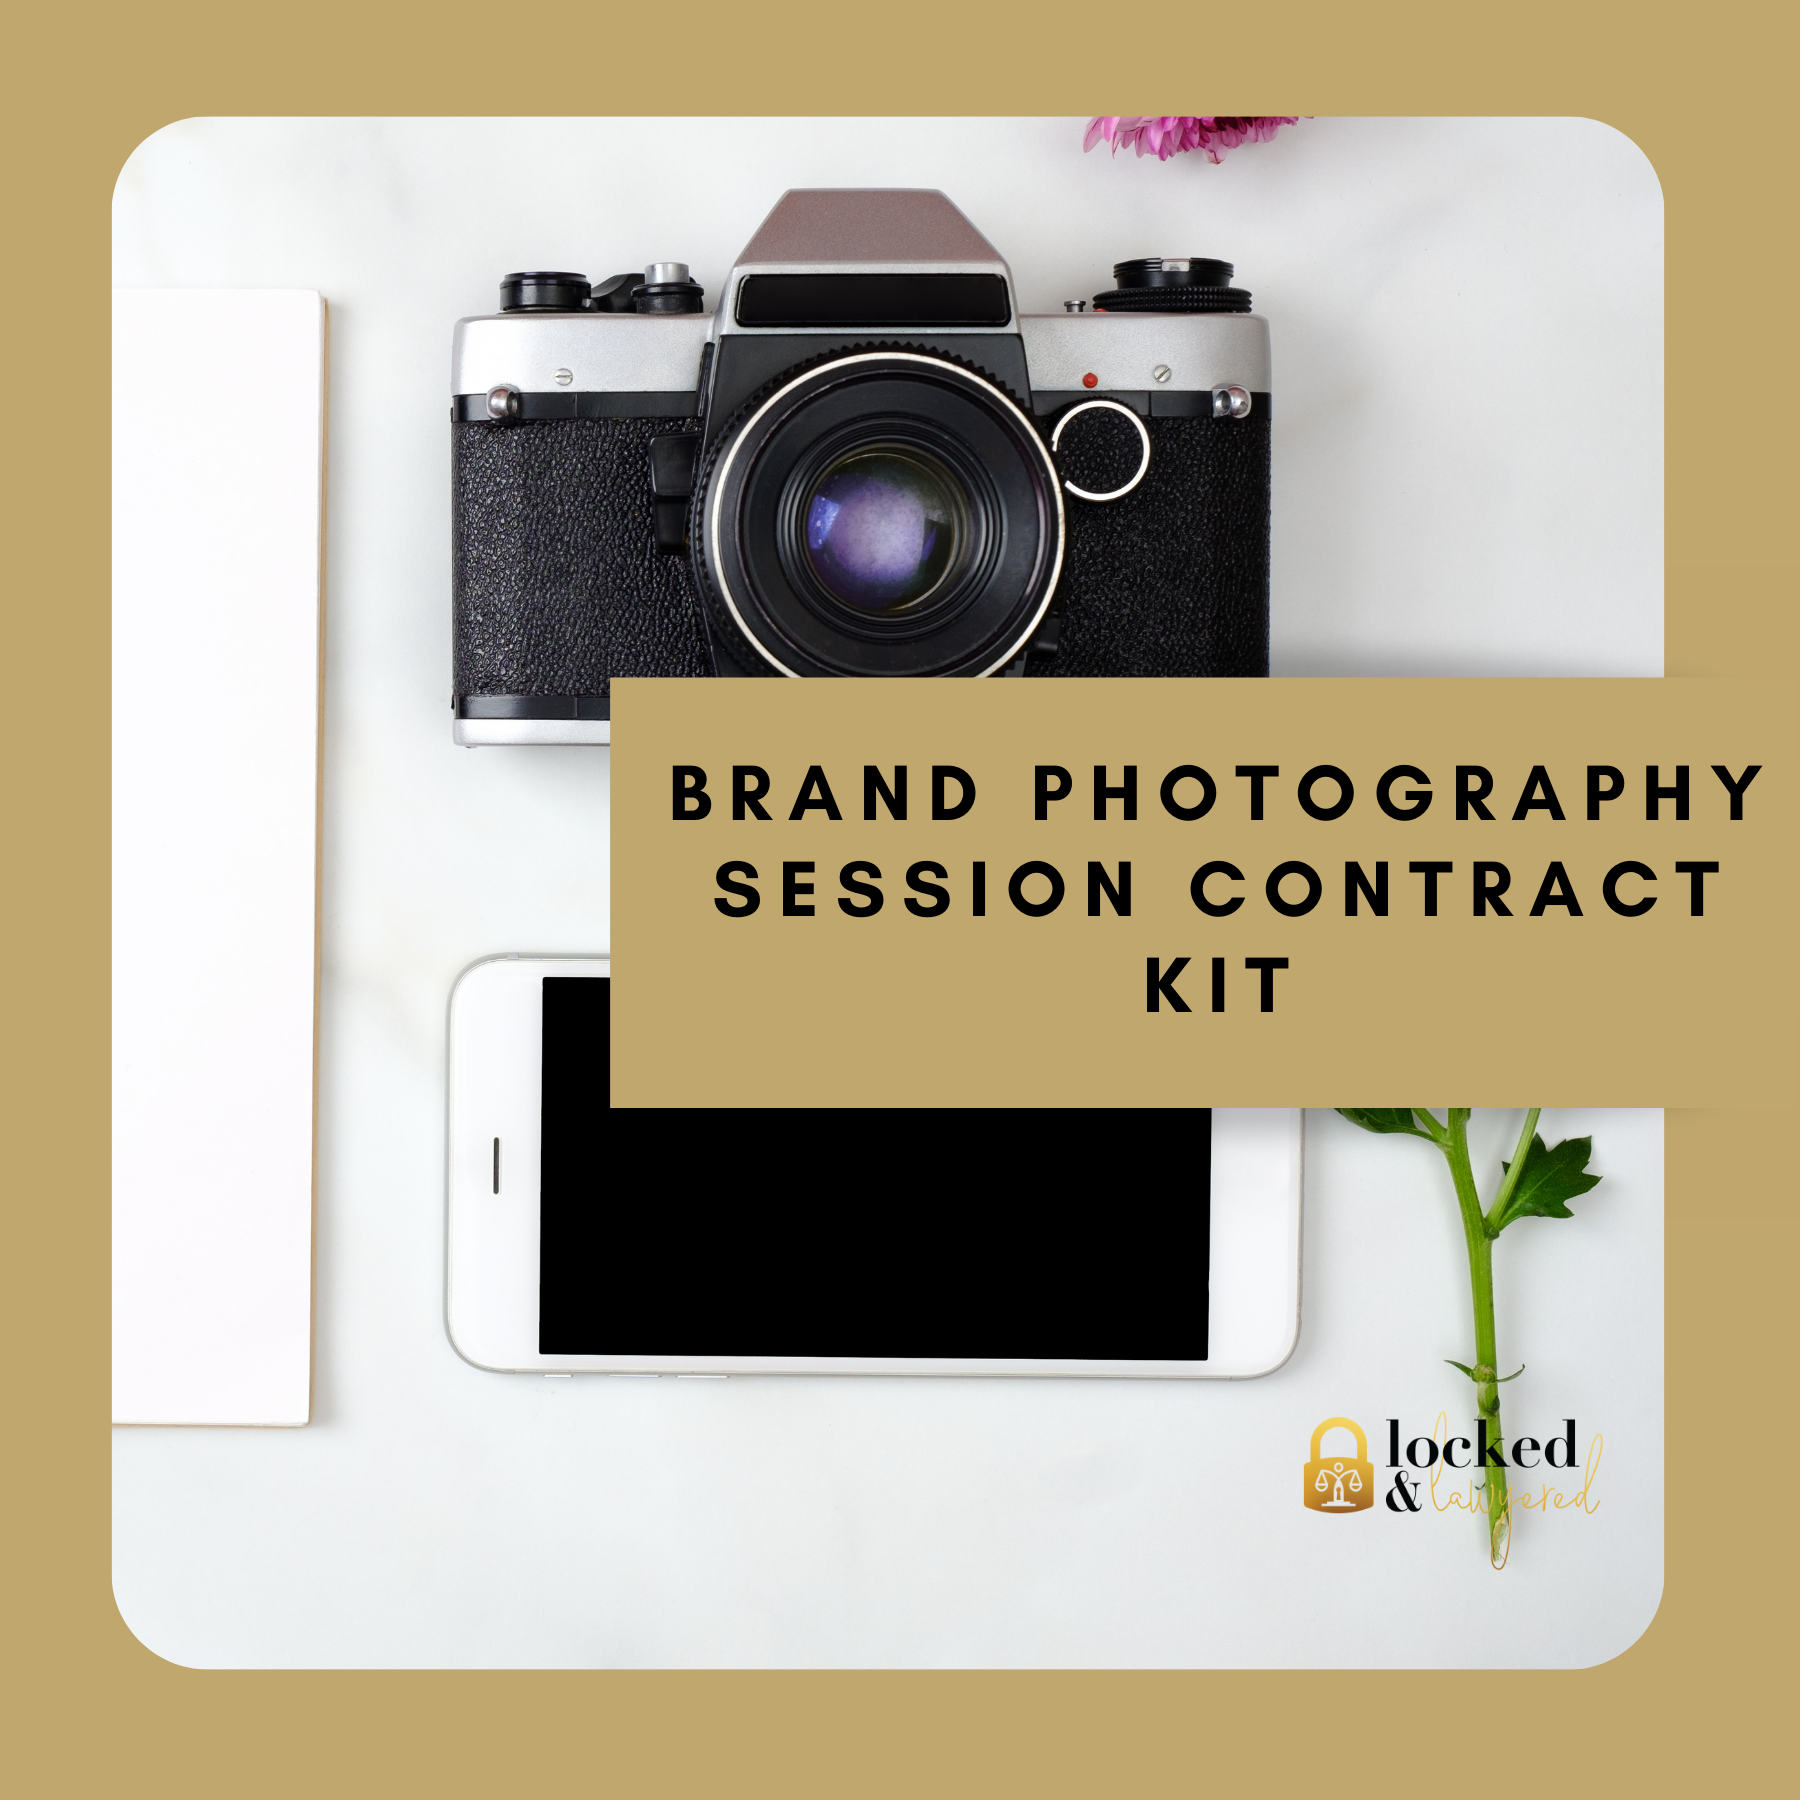 Brand Photography Session Contract Kit